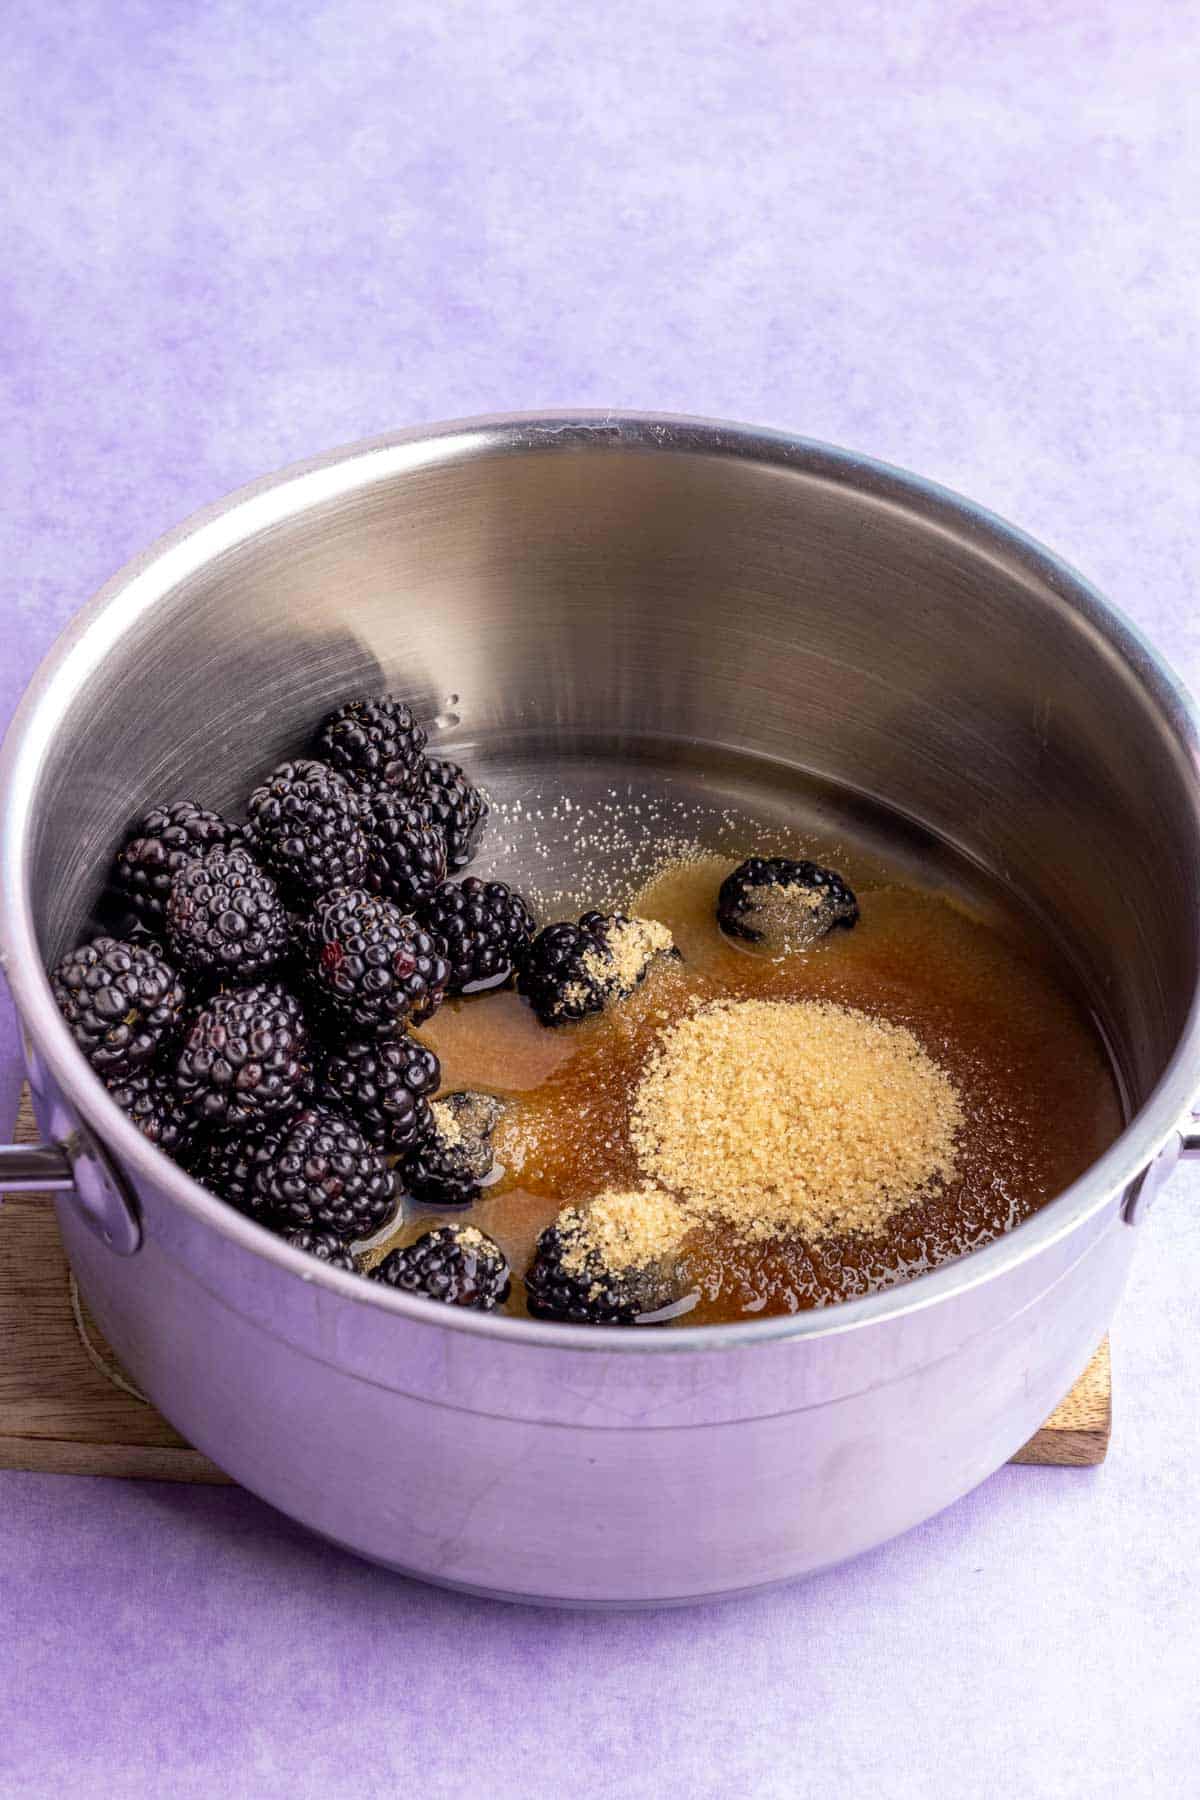 Blackberries, brown sugar, and water added to a pot.